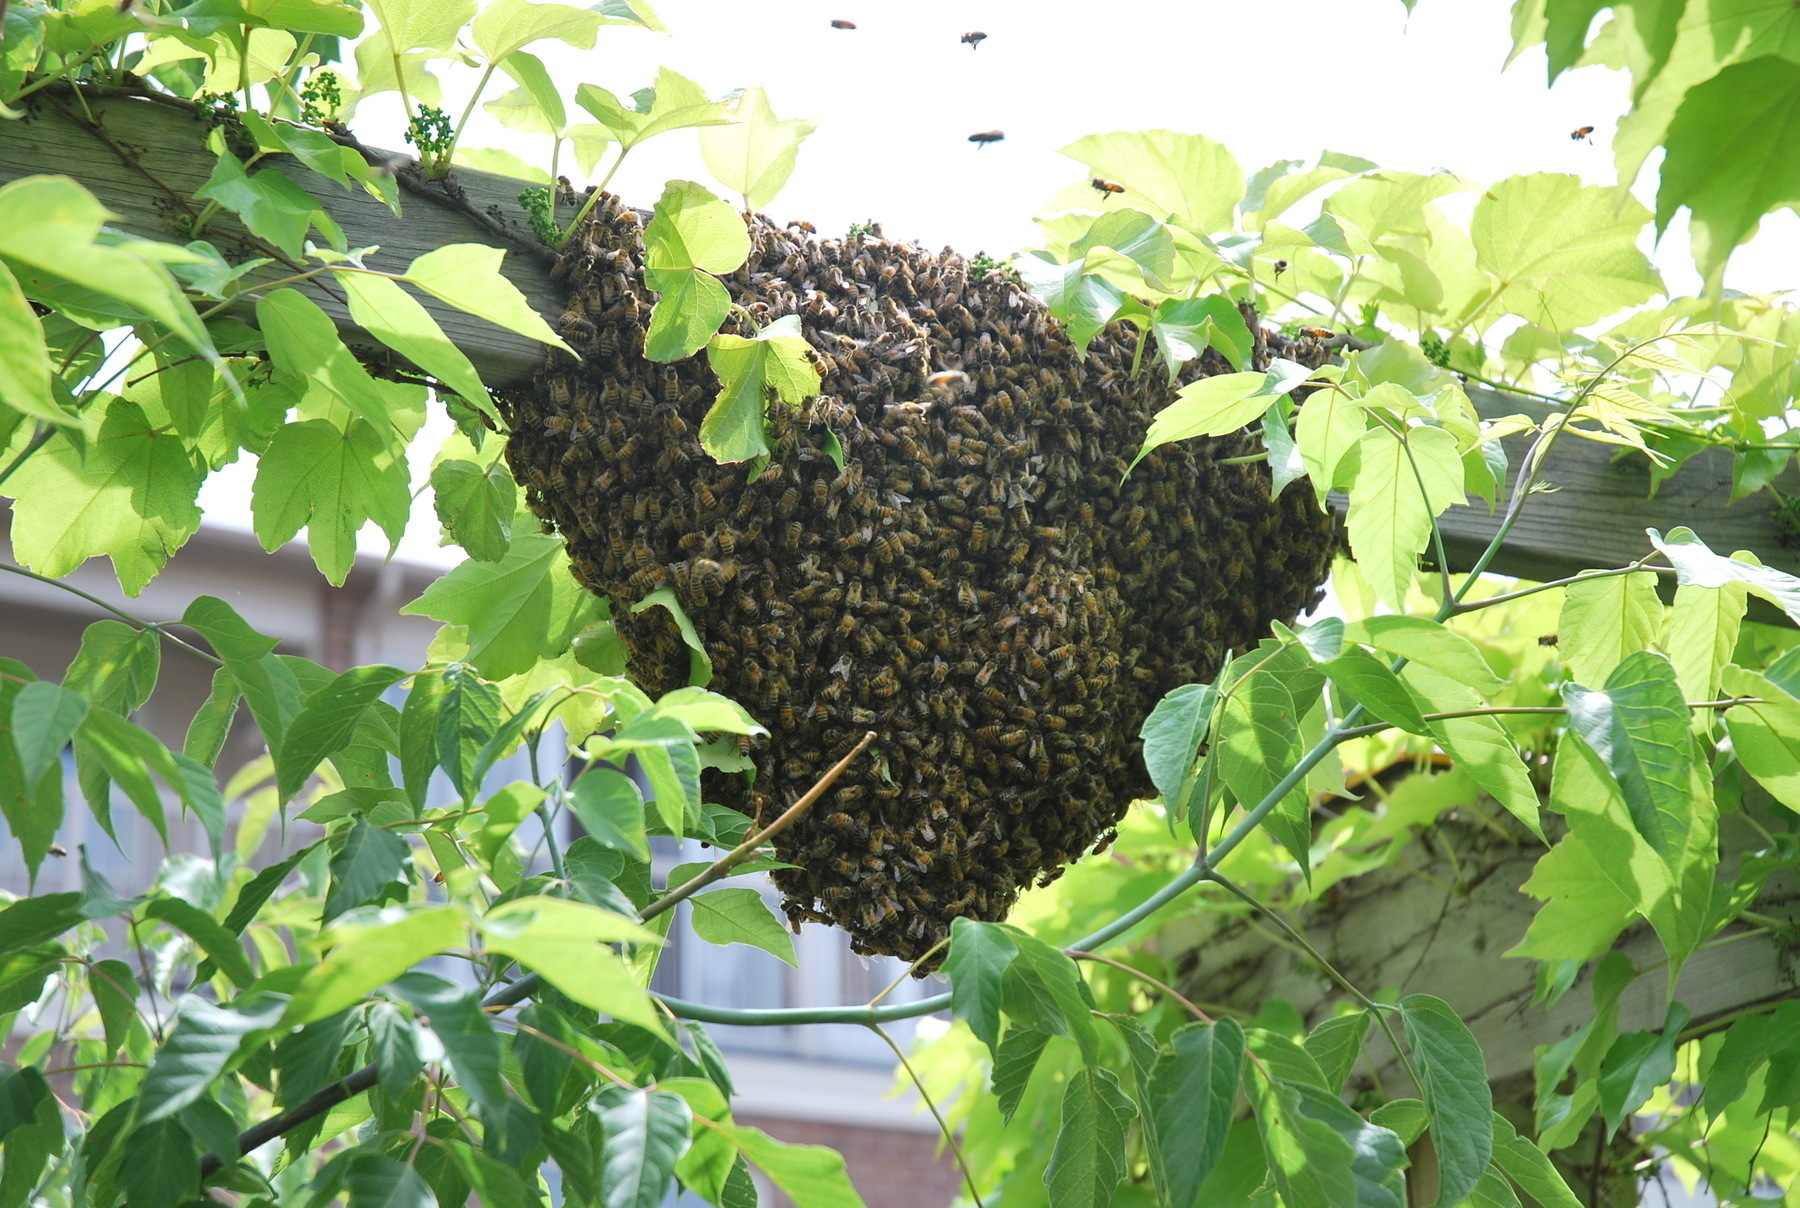 Swarm of bees in the backyard 